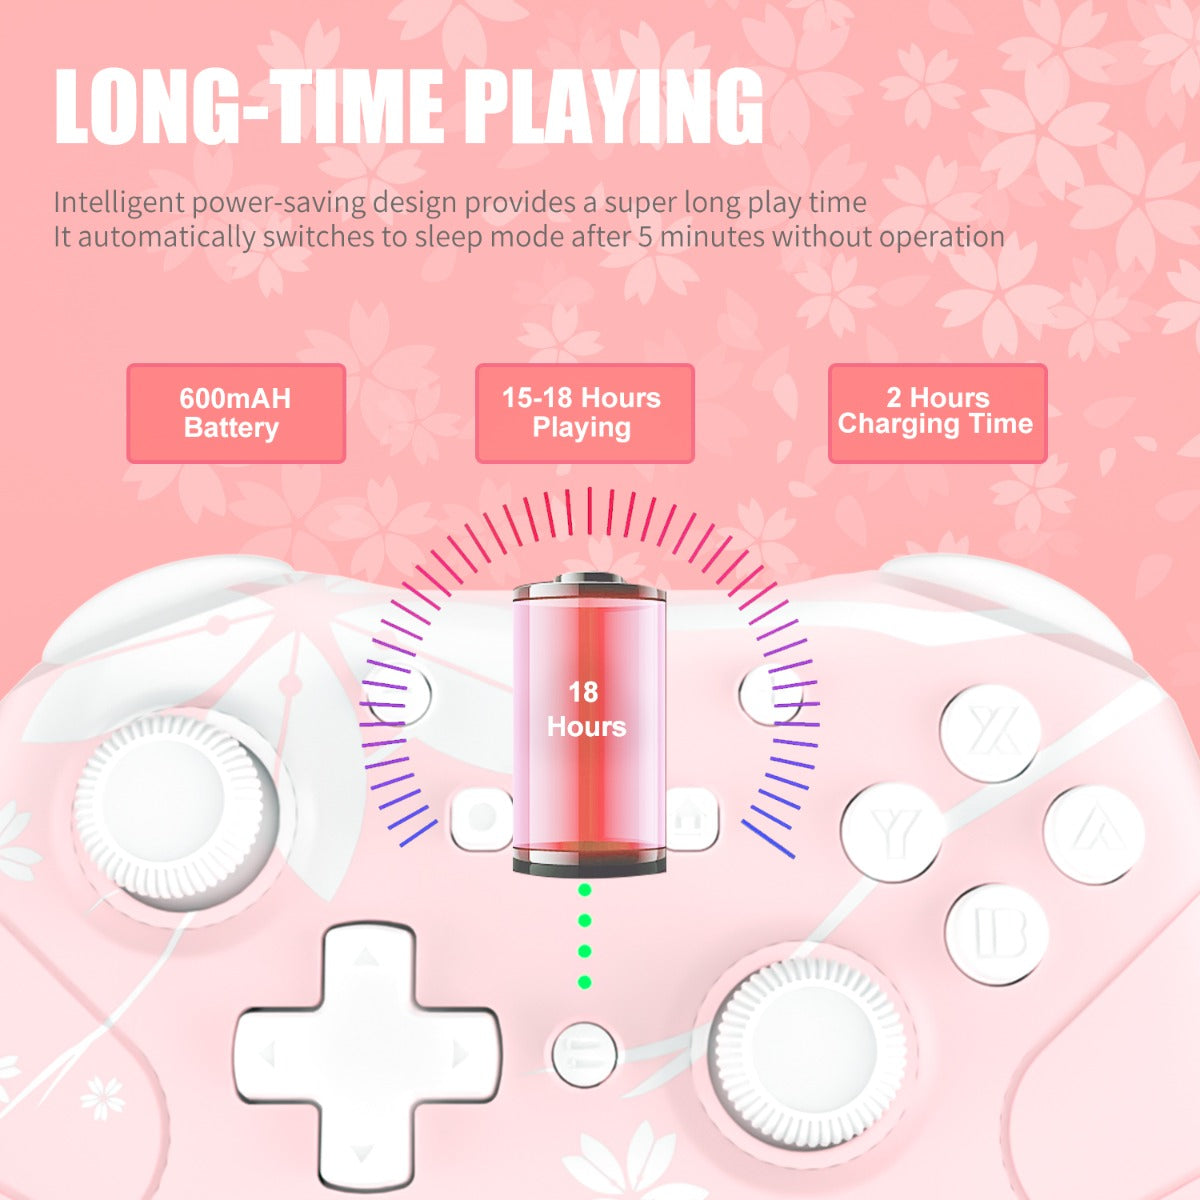 NS Wireless Controller for Nintendo Switch/Lite, Mytrix Wireless Switch Pro Controller with Auto-Fire Turbo, Motion Control, Wake-Up, Headphone Jack, Adjustable Vibration, Sakura Cherry Blossoms Pink